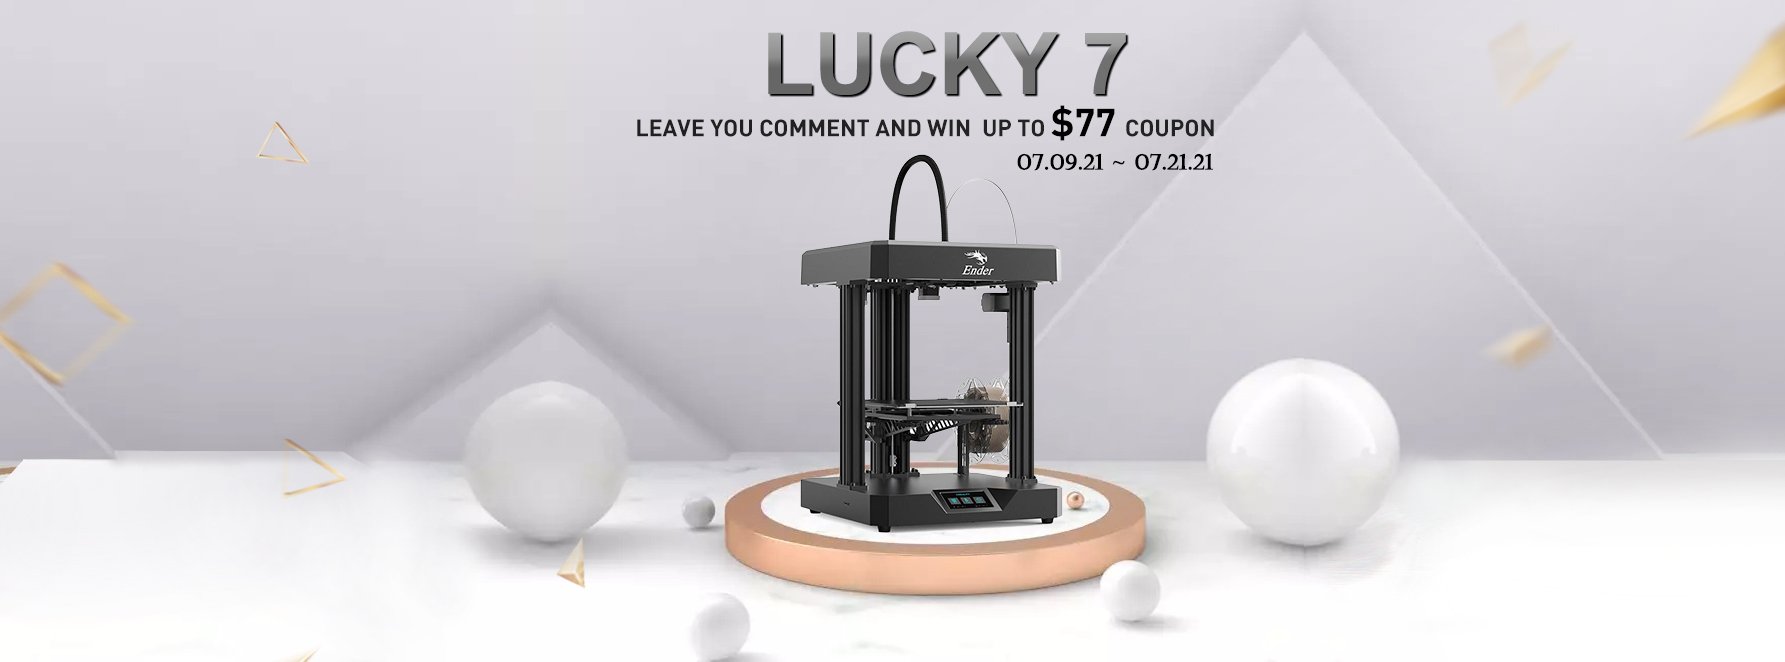 Creality3d official LUCKY 7 event